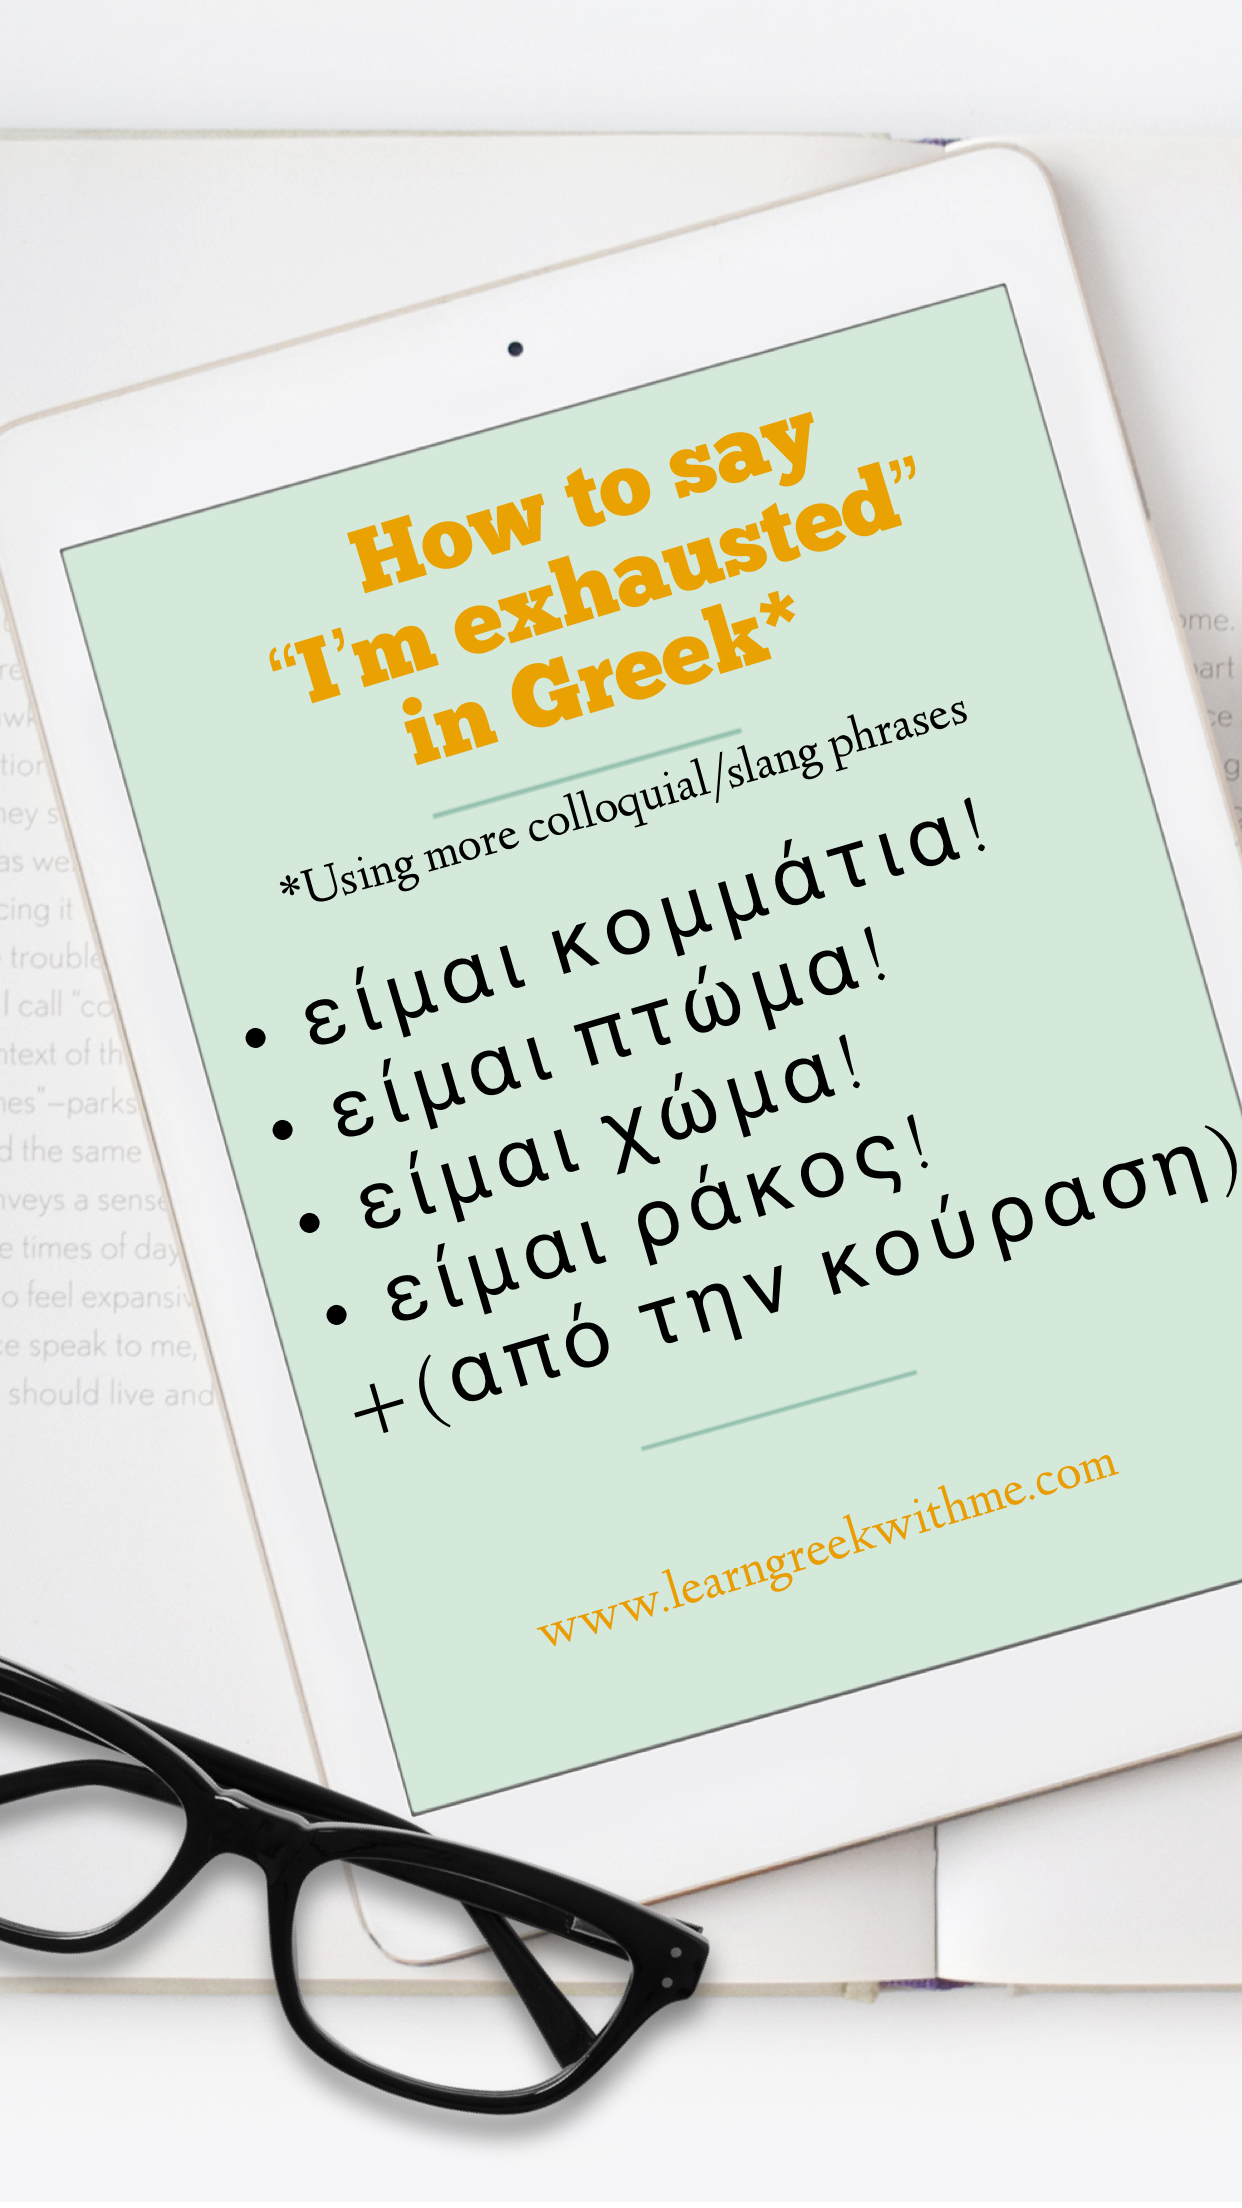 How to say “I’m exhausted” in Greek using colloquial and slang phrases